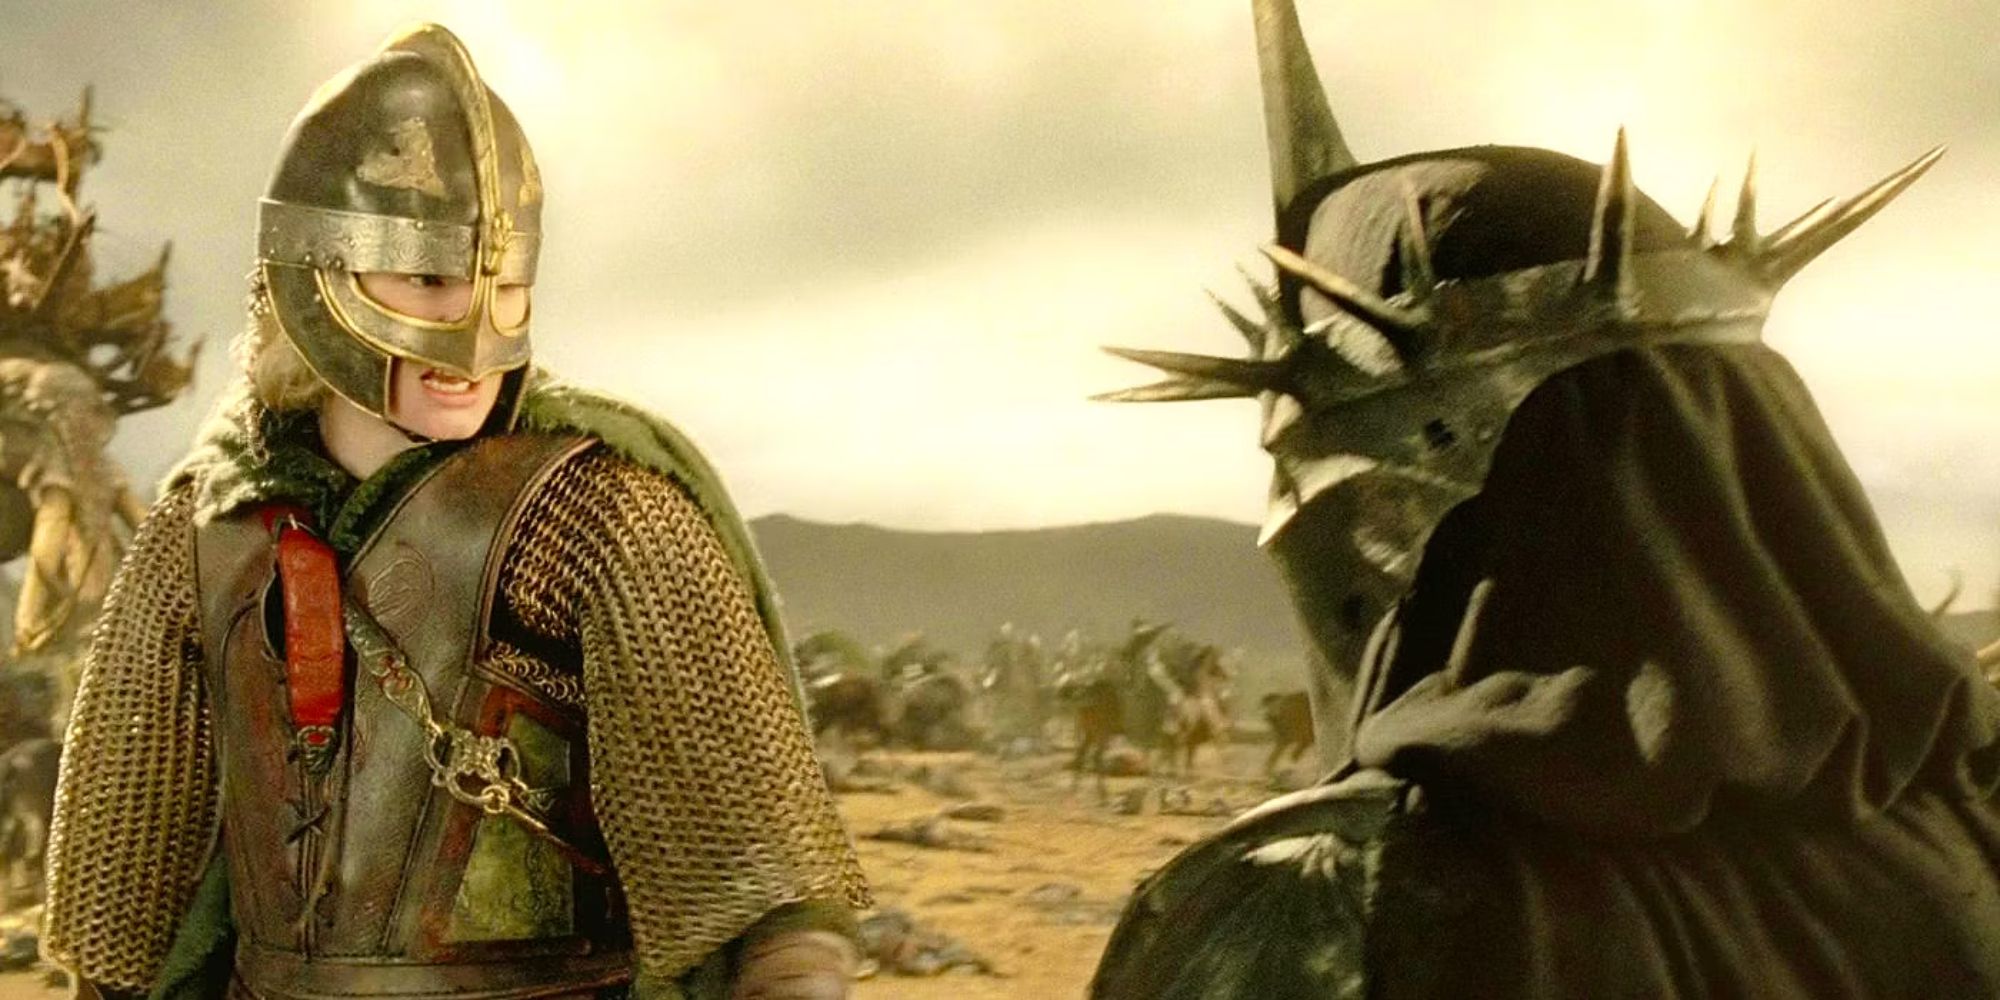 Eowyn and the Witch King from Lord of the Rings The Return of the King